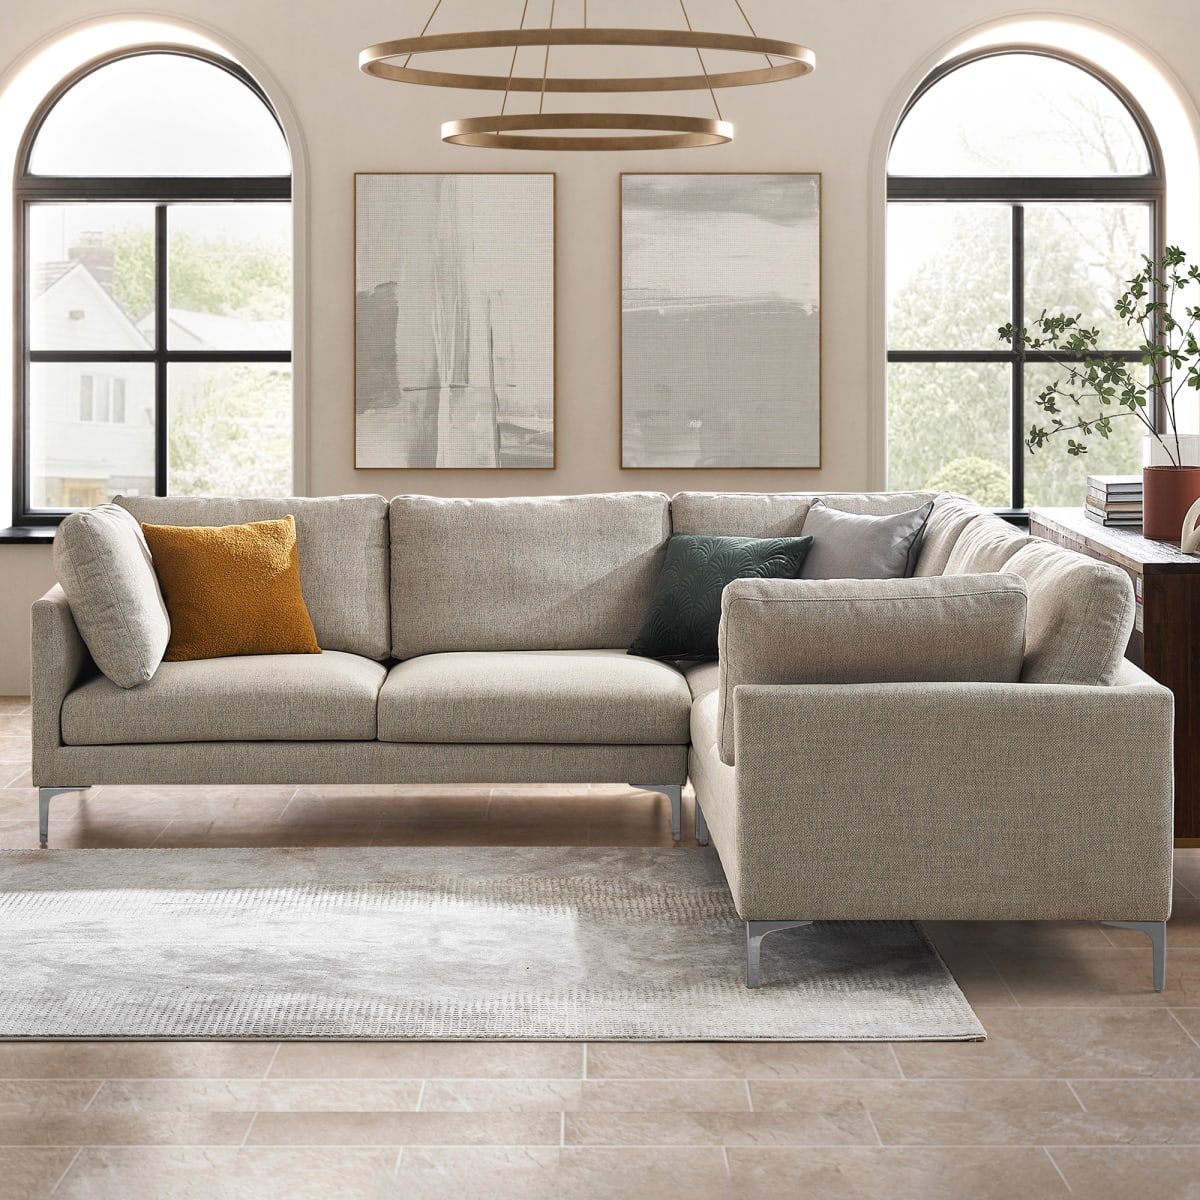 Adams L Shape Sectional Sofa | Castlery | Classic Living Room, Sectional  Sofa, Castlery With Regard To Beige L Shaped Sectional Sofas (View 4 of 15)